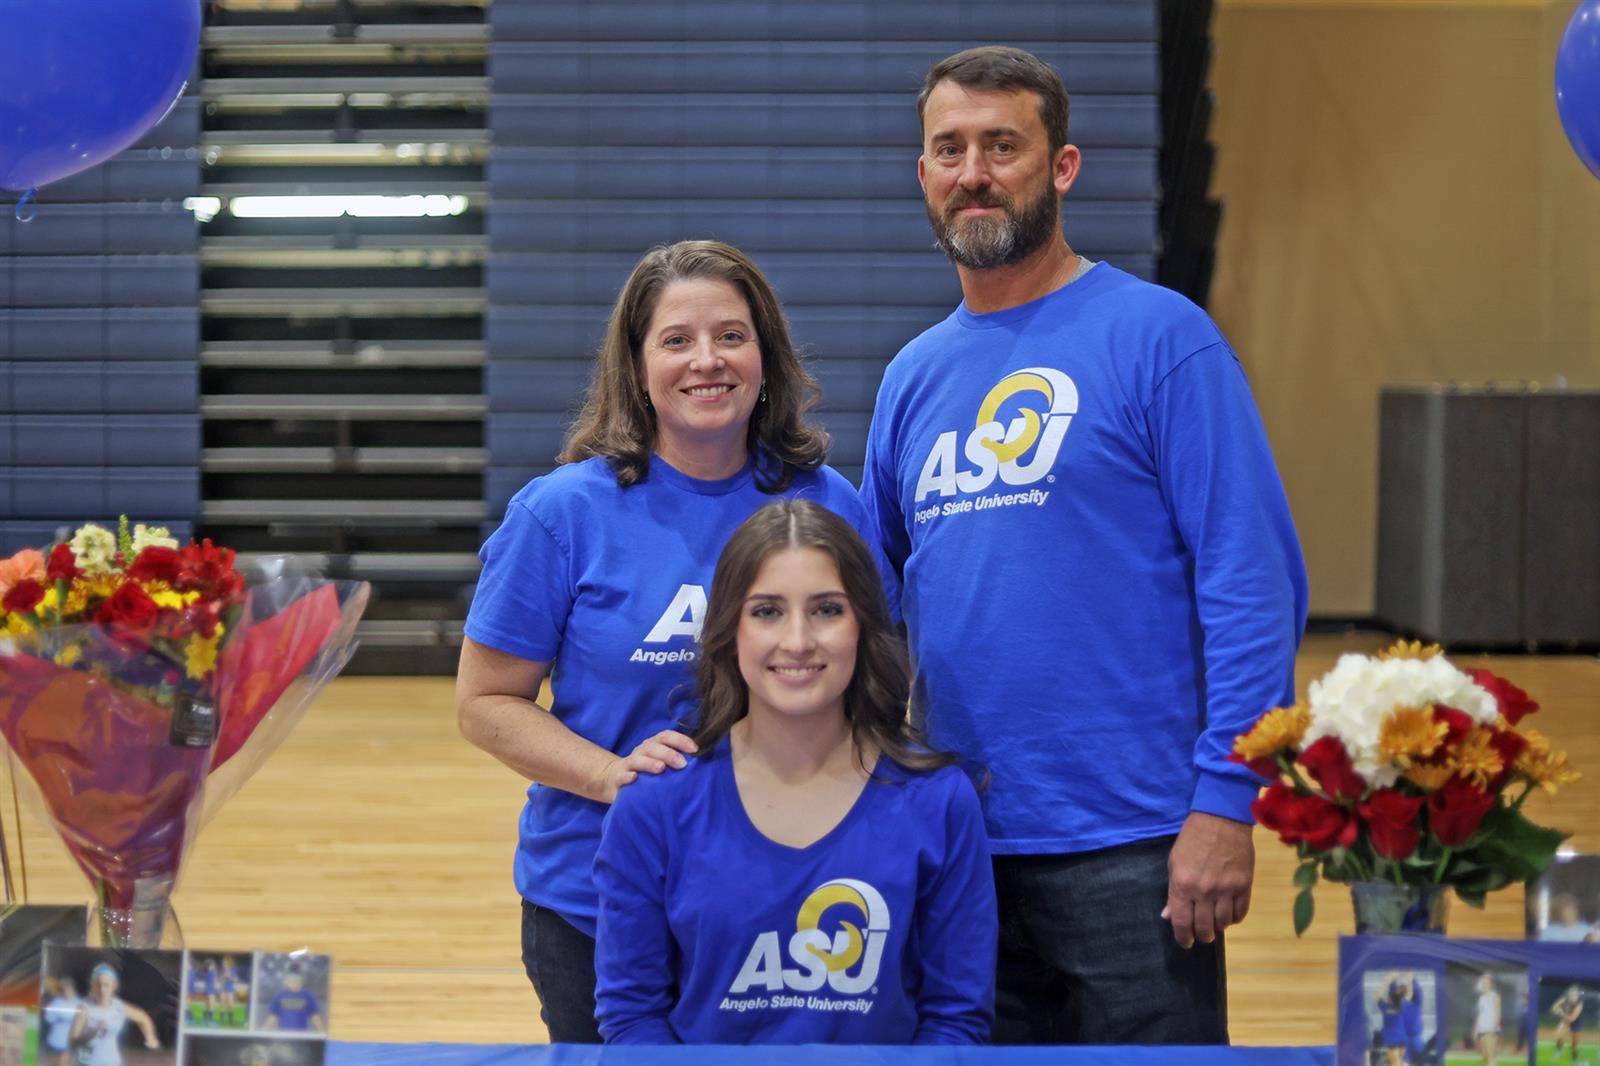 Cypress Ranch High School senior Hannah Carrier, seated, signed a letter of intent to play soccer at Angelo State University.